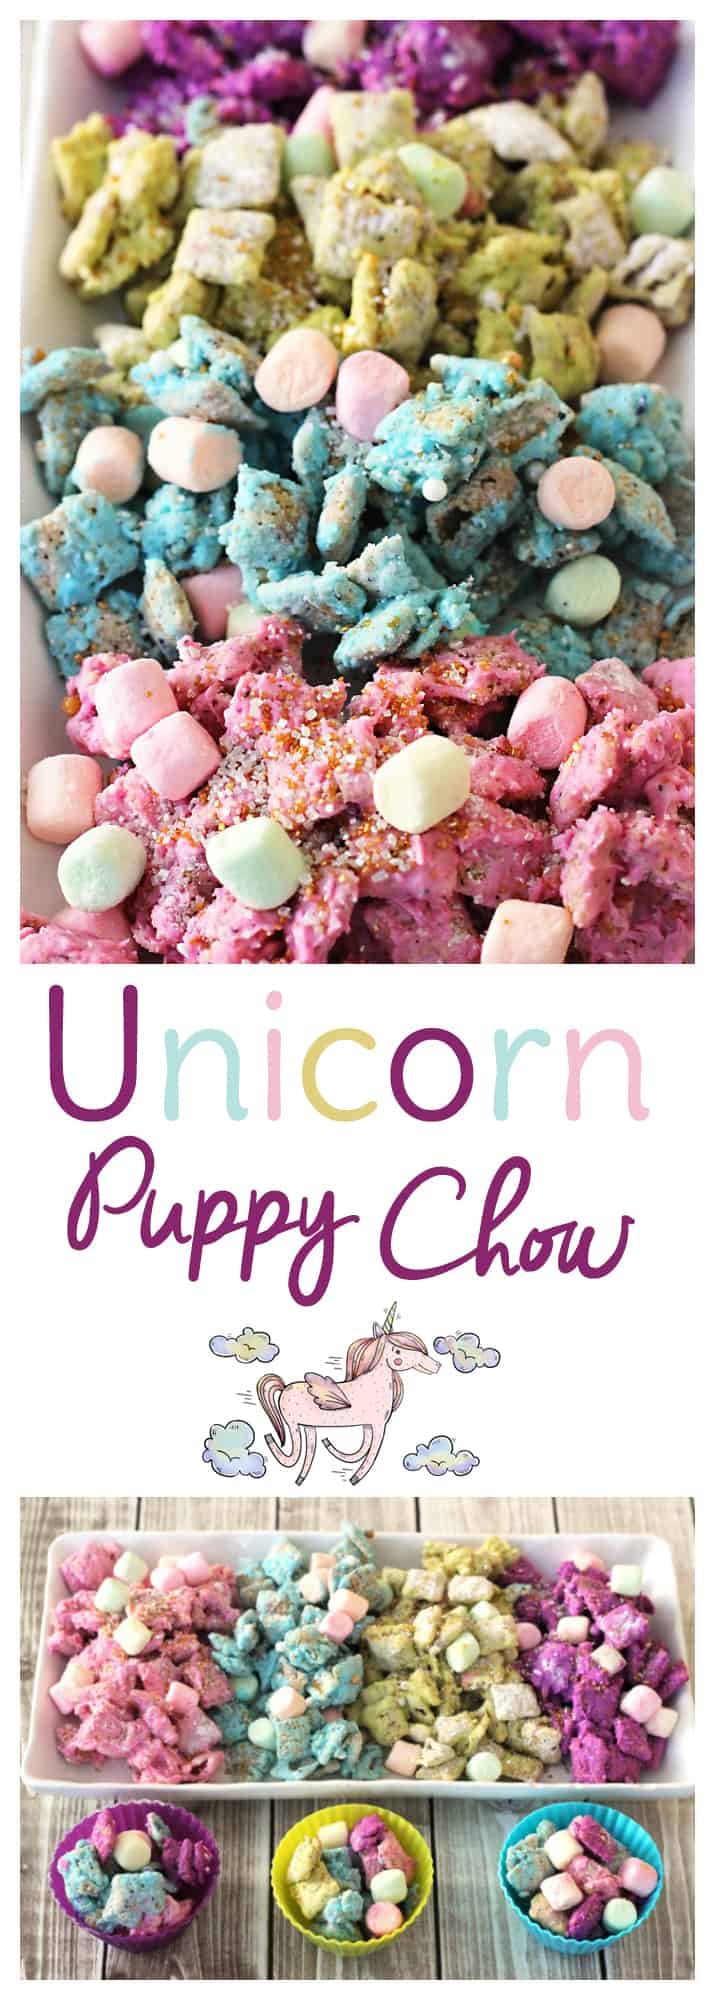 Use blueberry Chex mix and fruity marshmallows to make this delicious unicorn puppy chow (or muddy muddies if you prefer) Perfect for a unicorn birthday party or just a fun gluten free snack for kids.